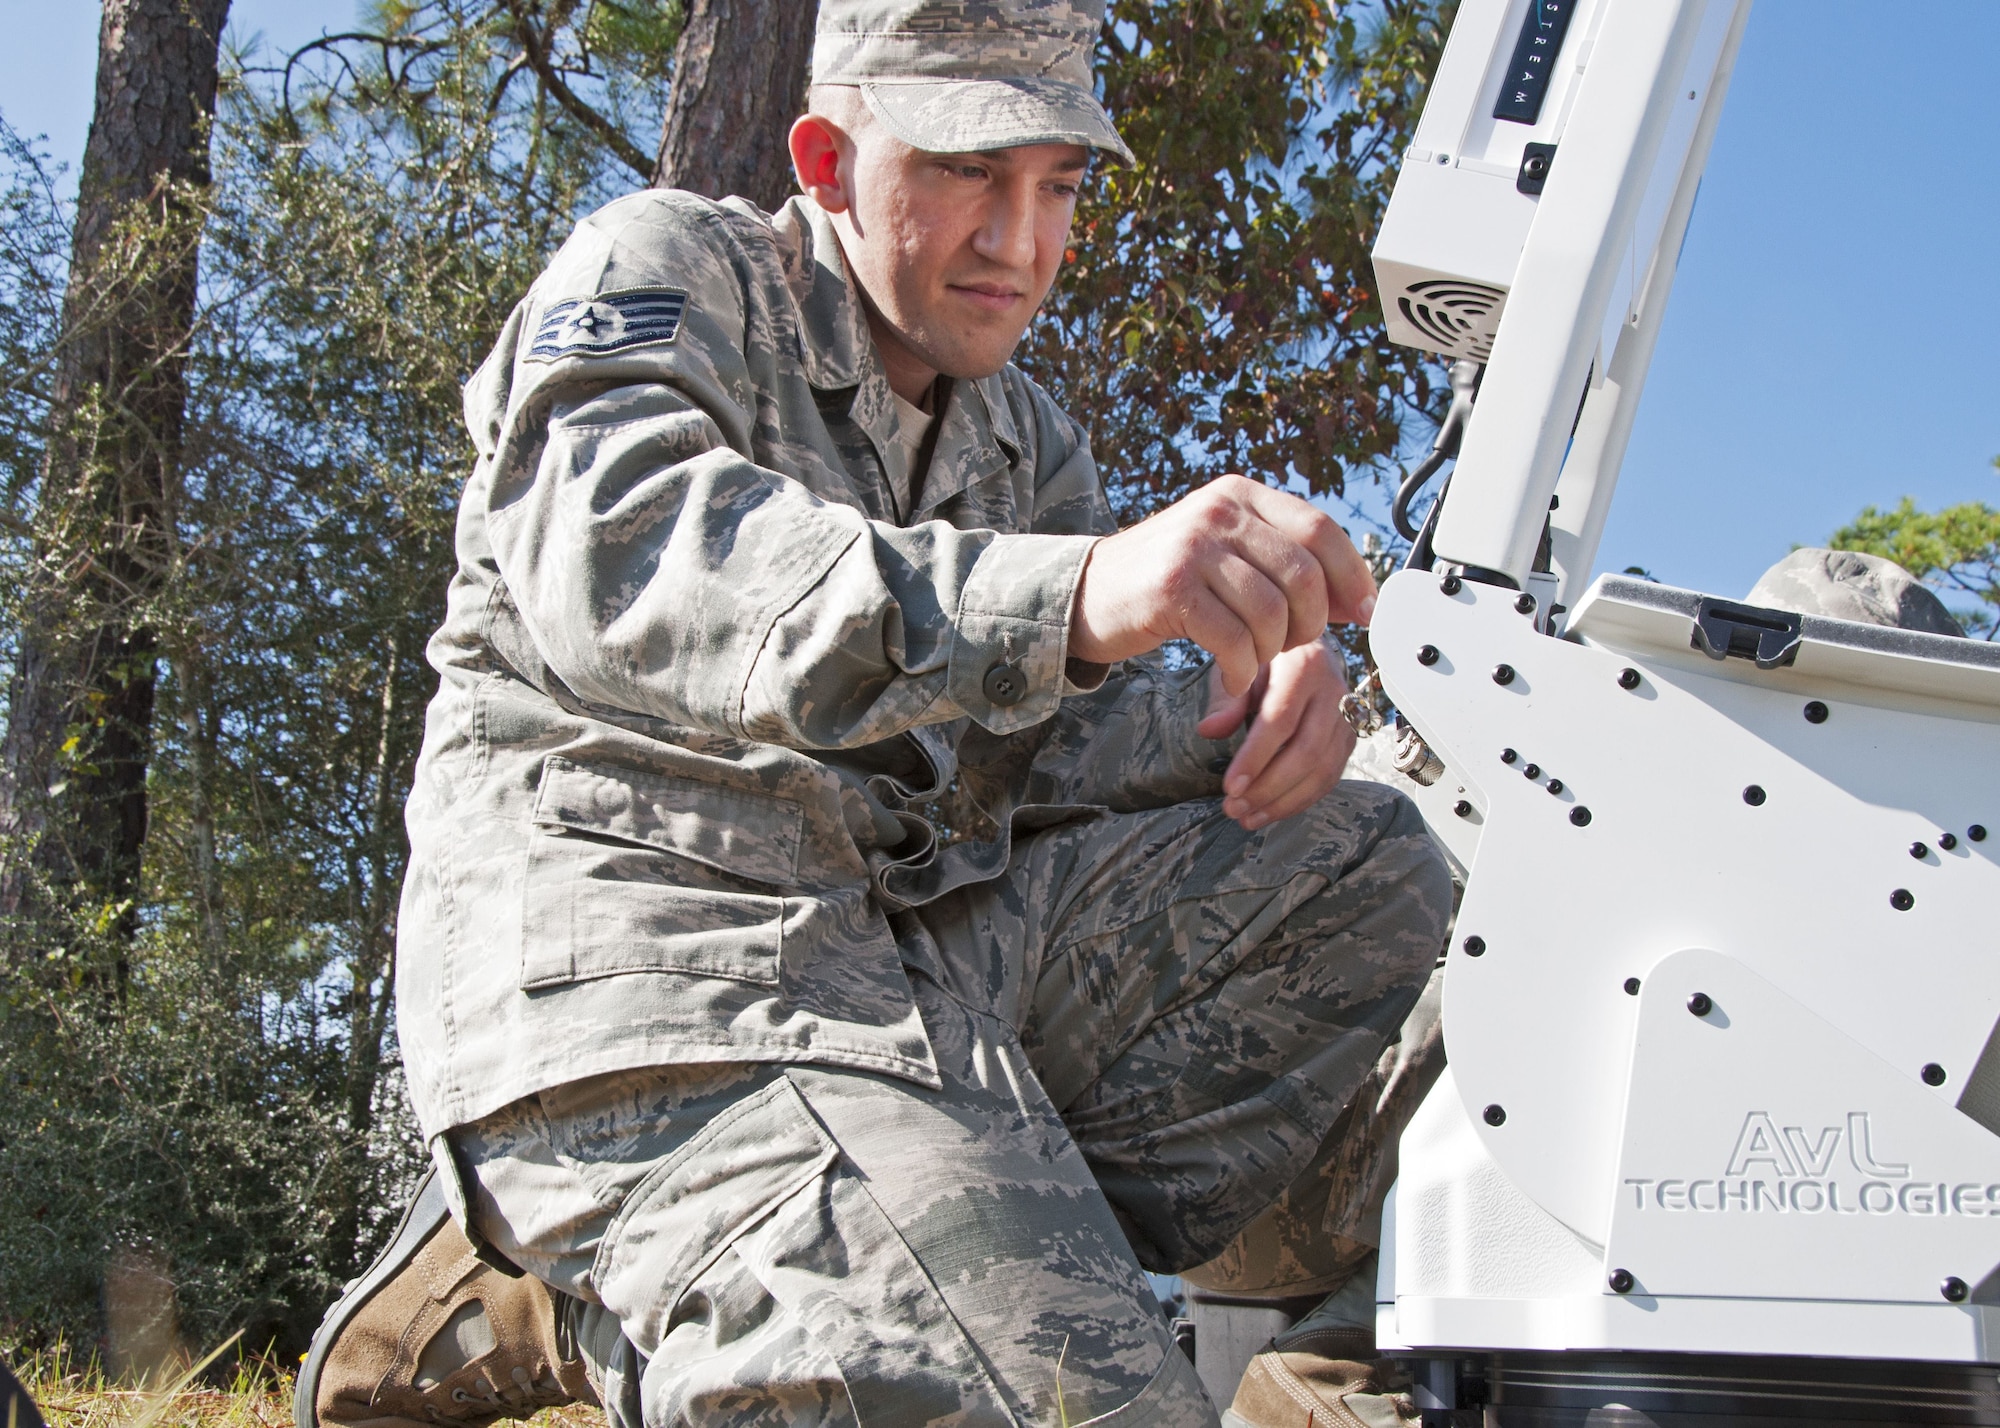 Staff Sgt. Frank Poli, a 919th Special Operations Communications Squadron cyber transmissions technician, assembles a satellite communications